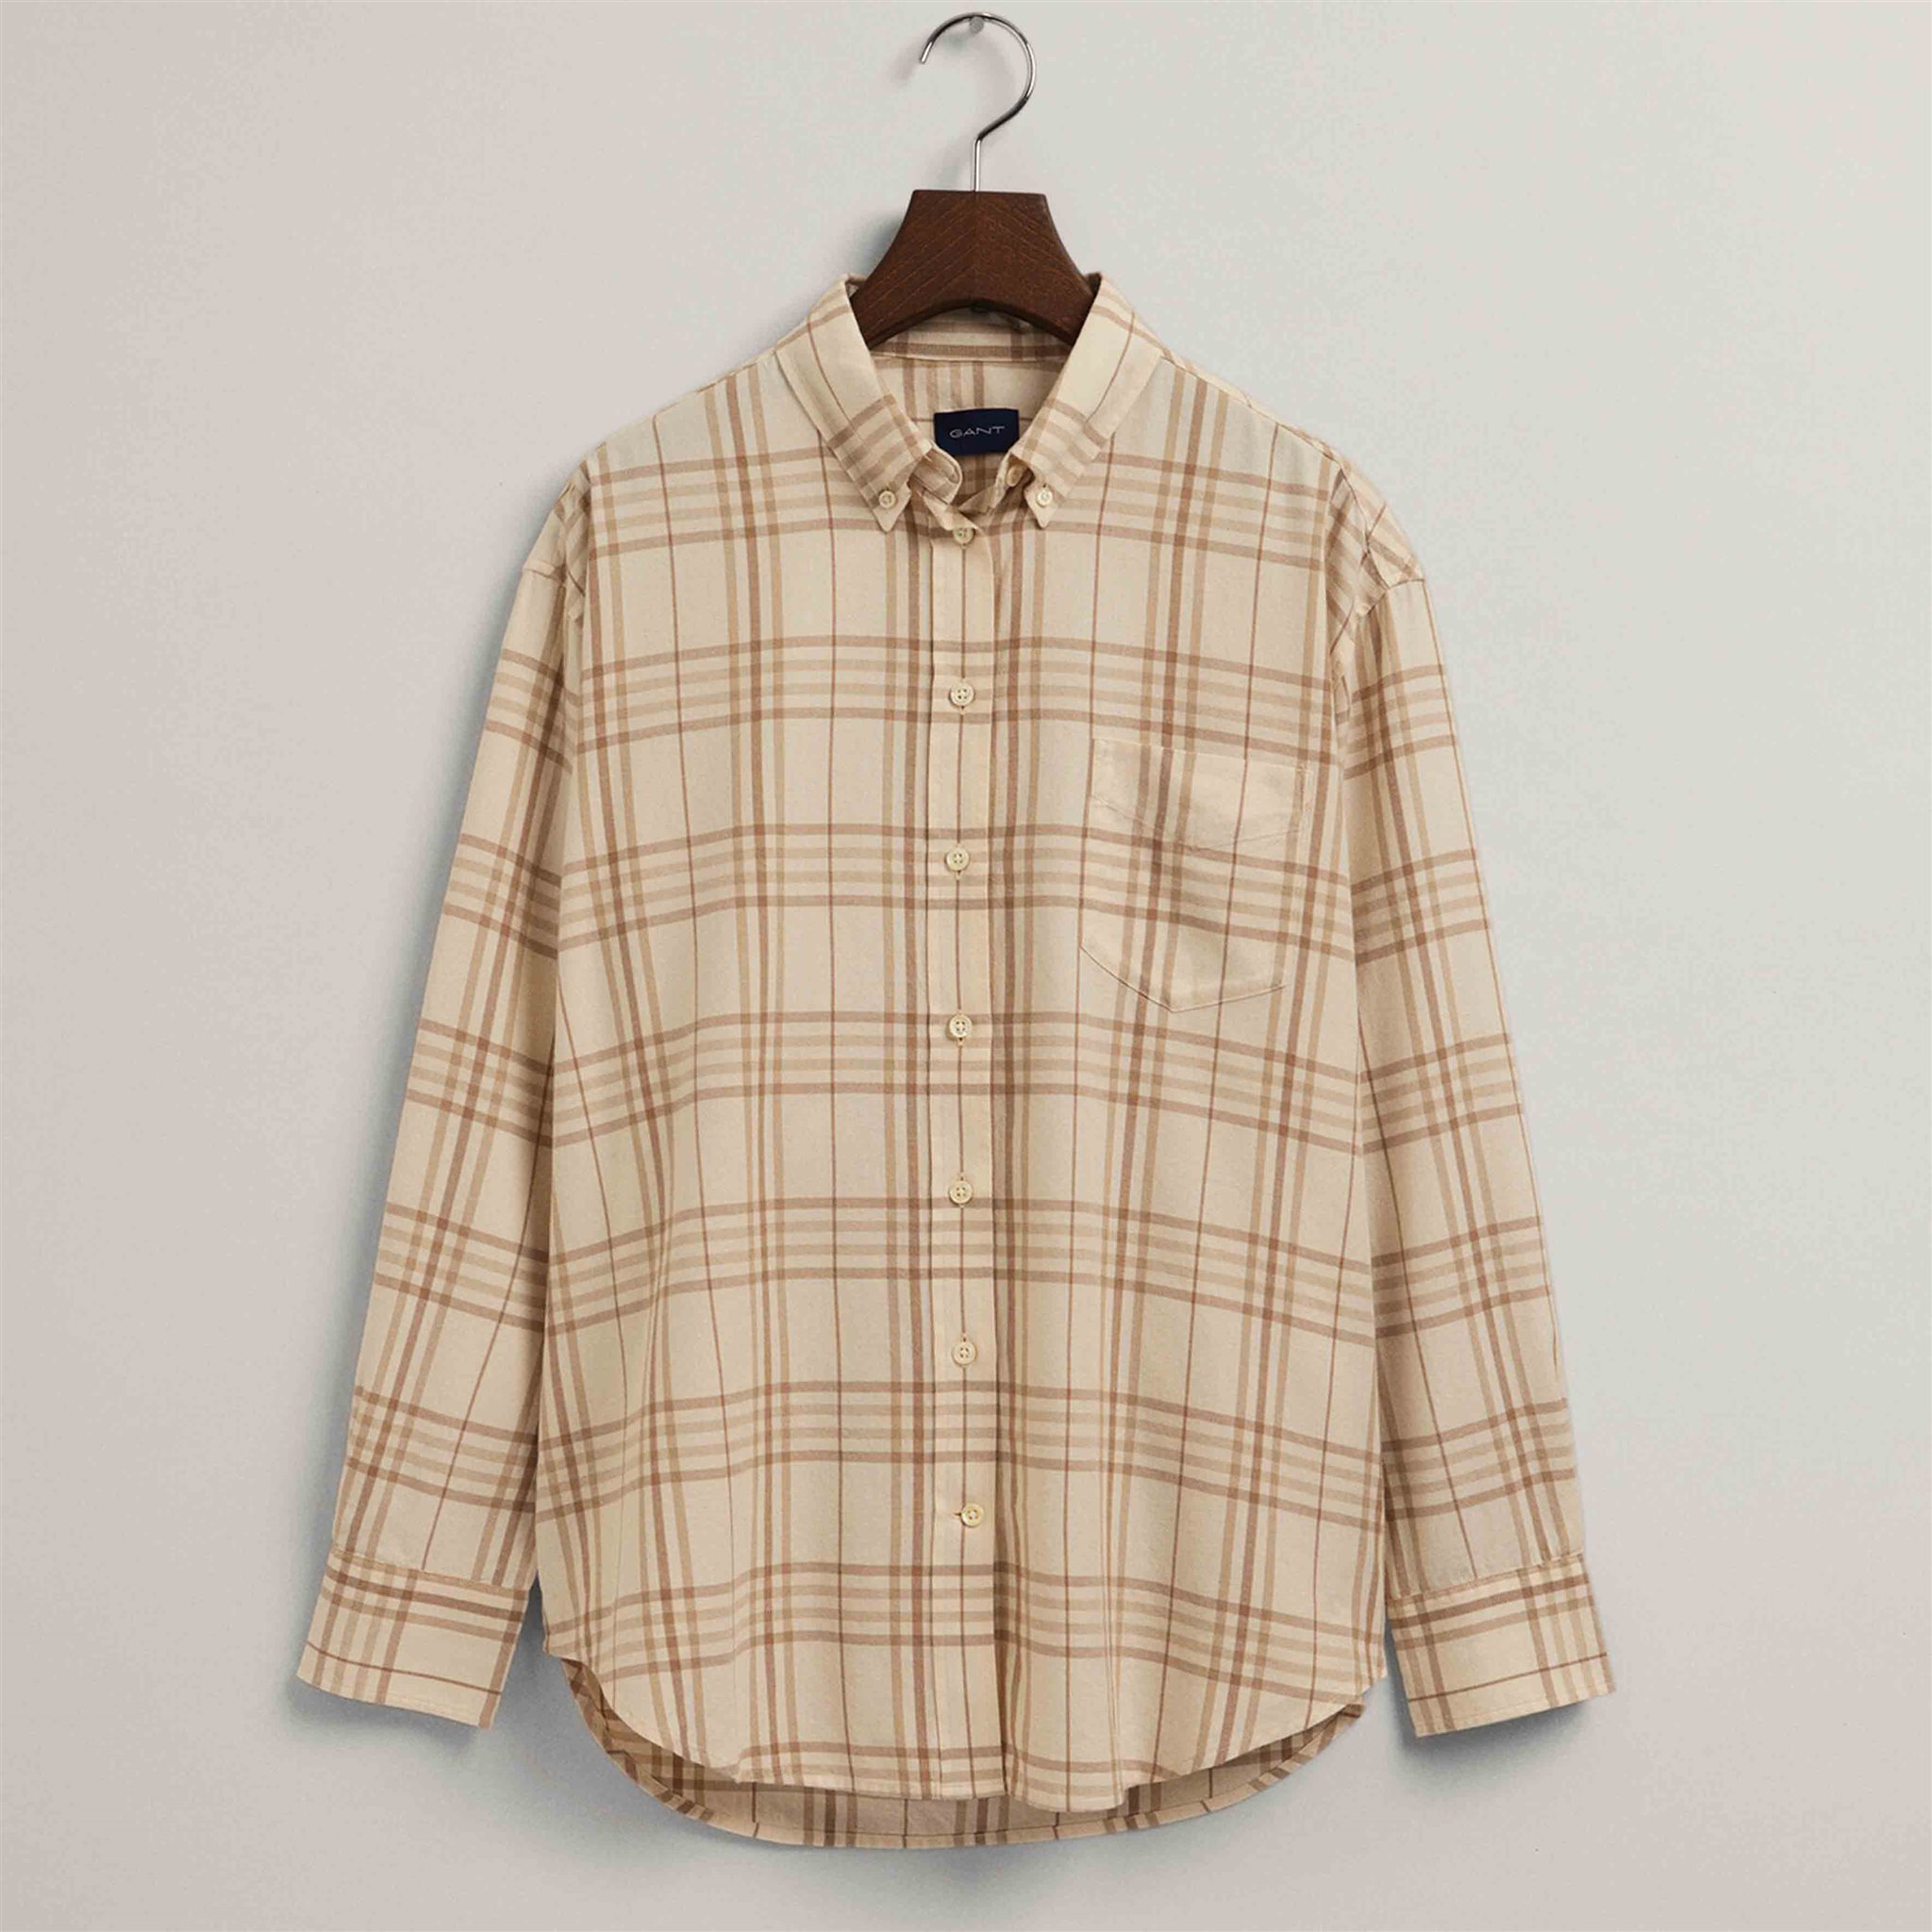 RELAXED CHECK FLANNEL SHIRT GANT WOMAN